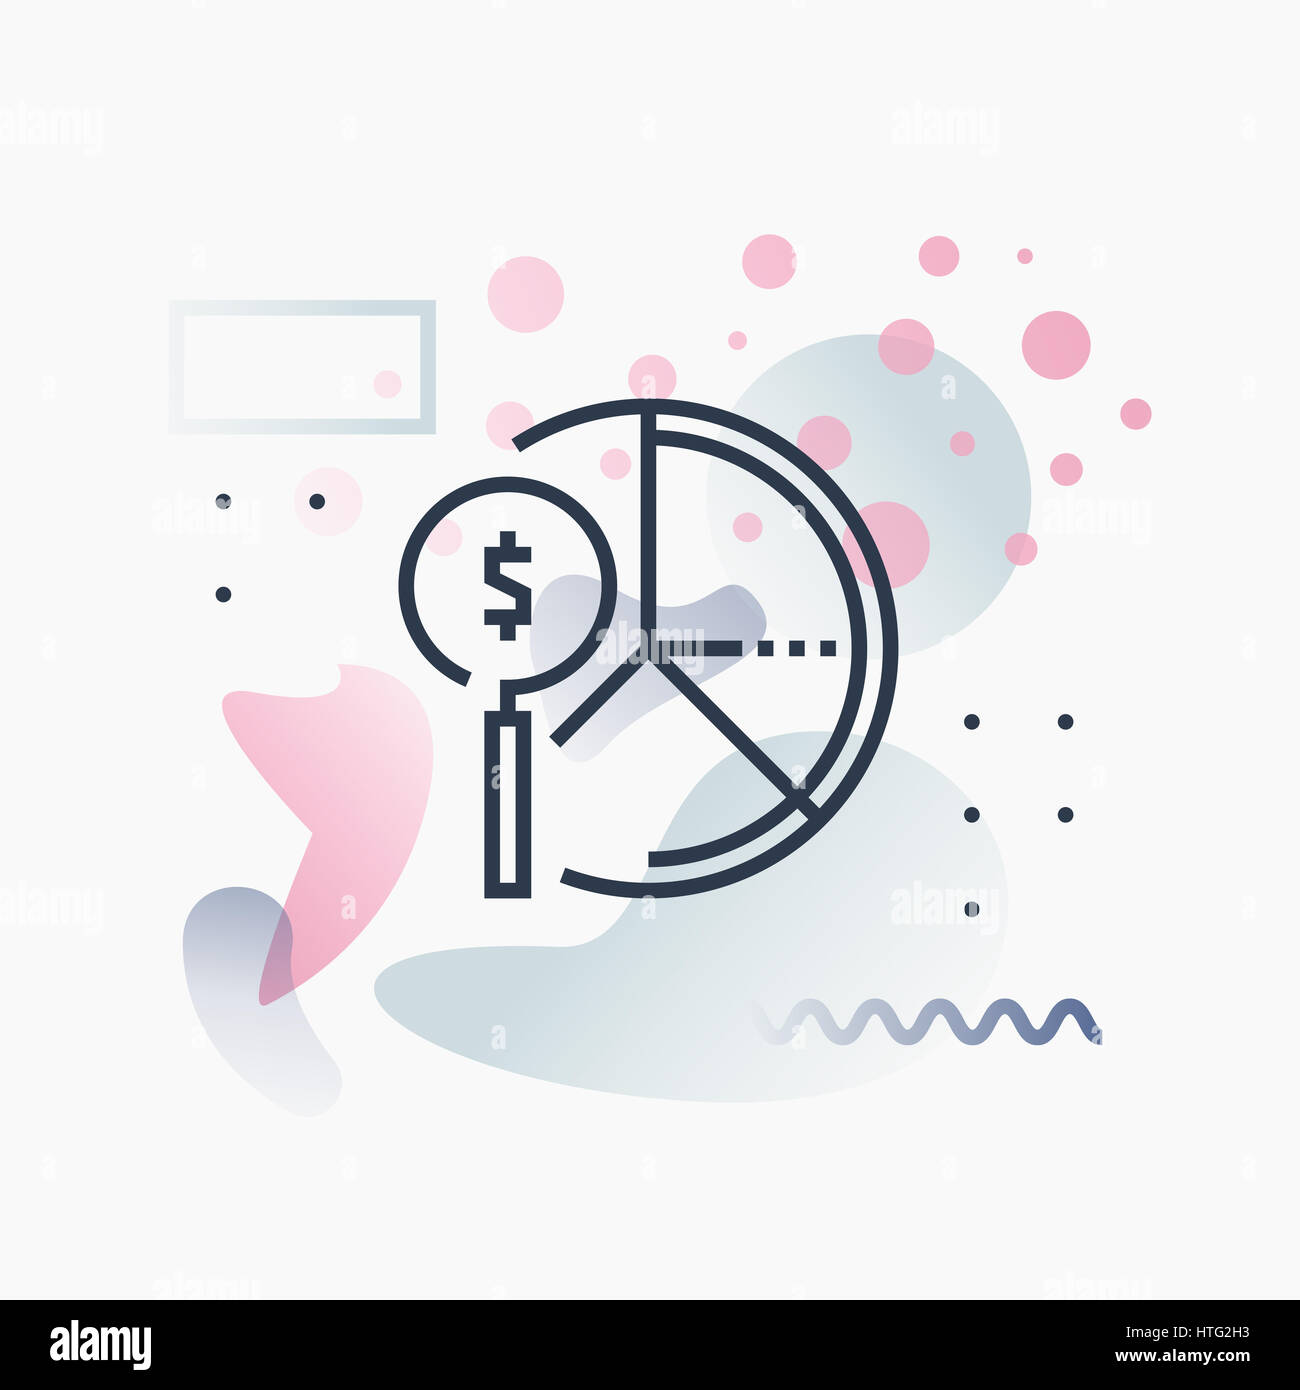 Financial analysis, annual report audit inspection. Abstract illustration concept. Stock Photo